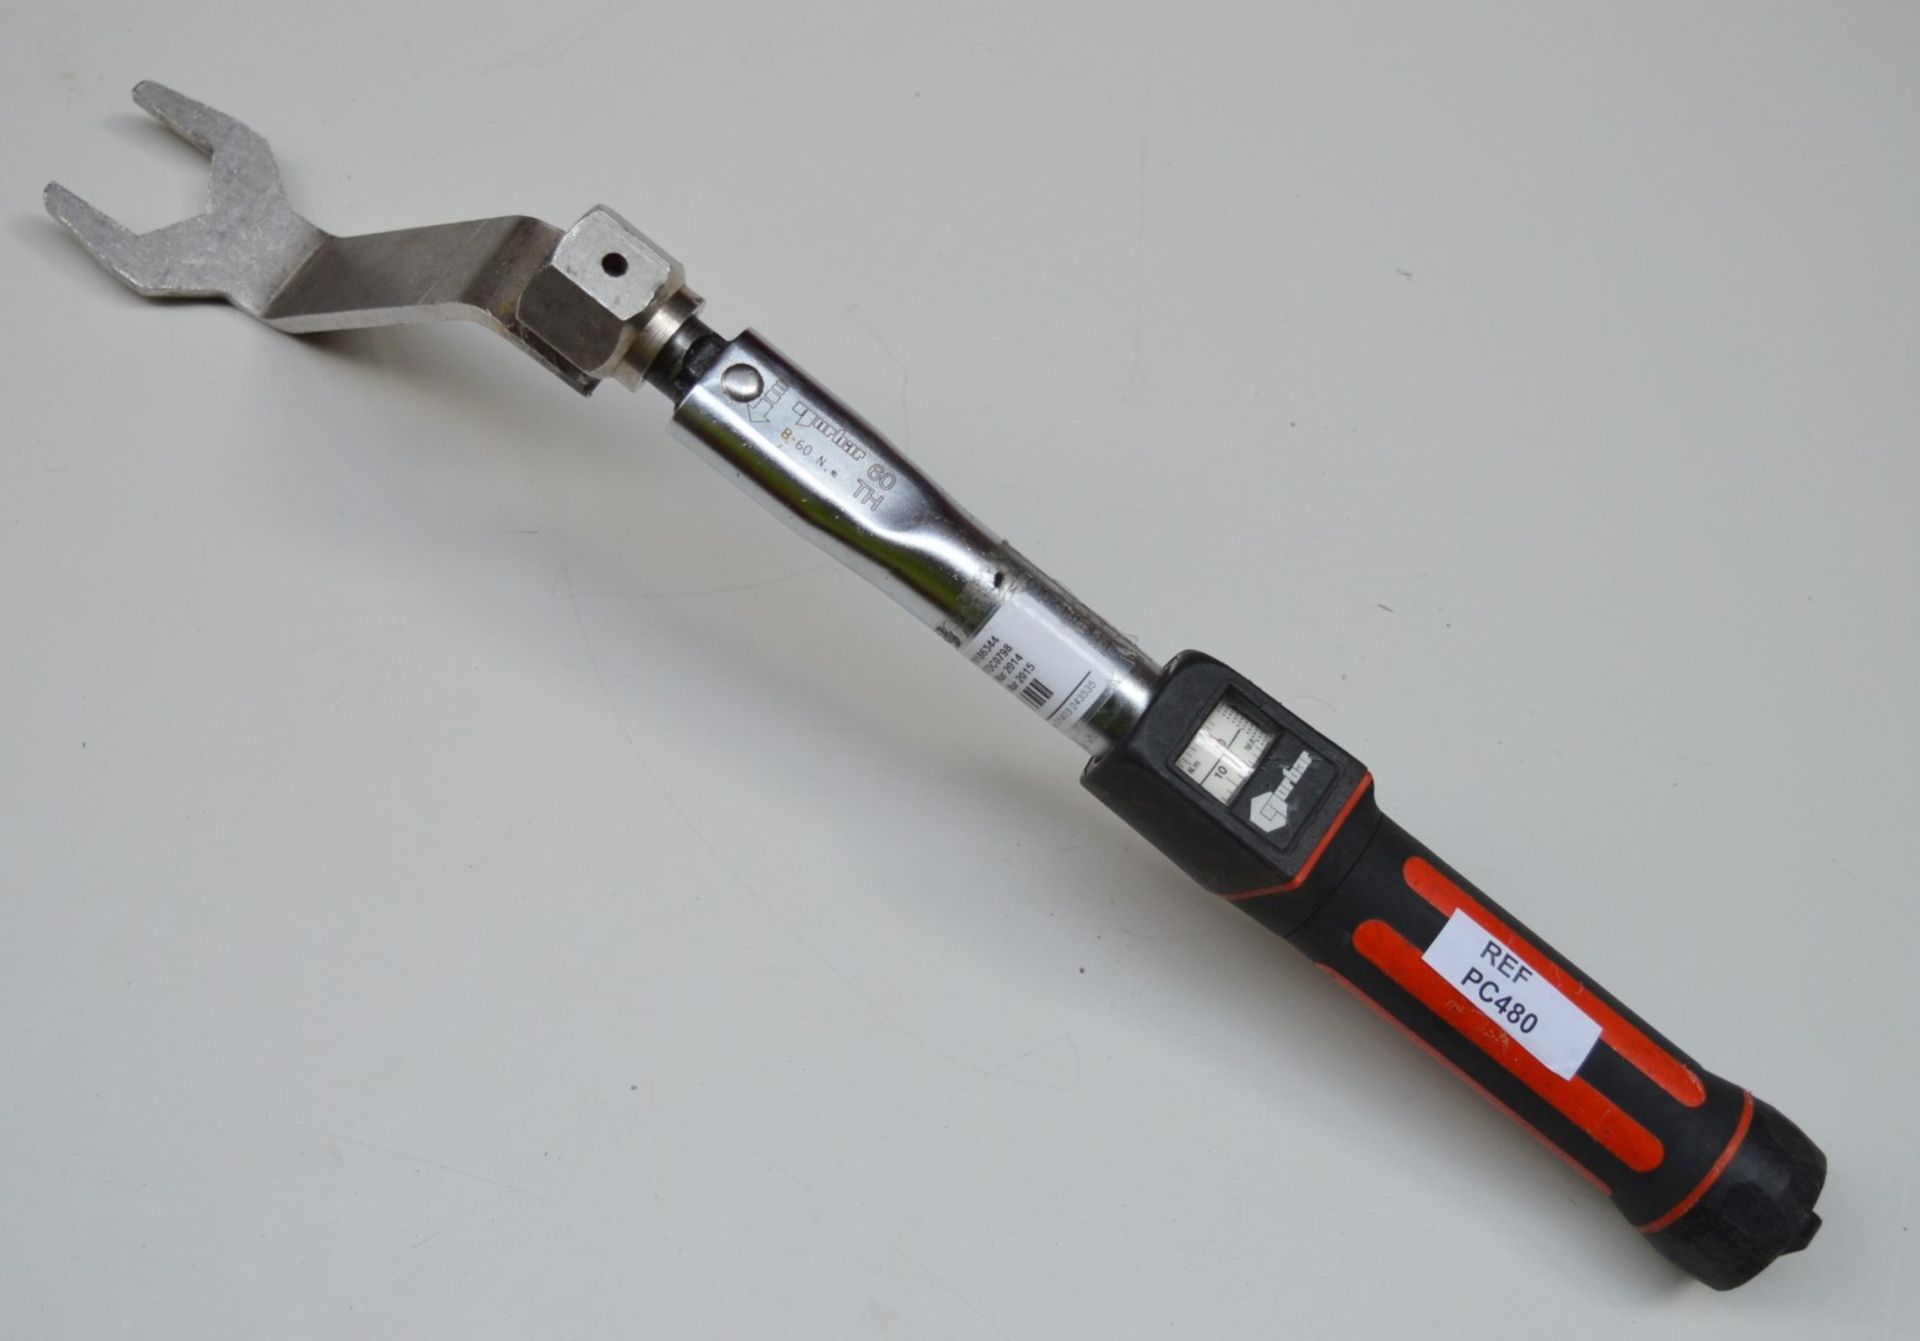 1 x Norbar 60TH Torque Wrench 8-60Nm with Spanner Attachment - CL300 - Ref PC480 - Location: